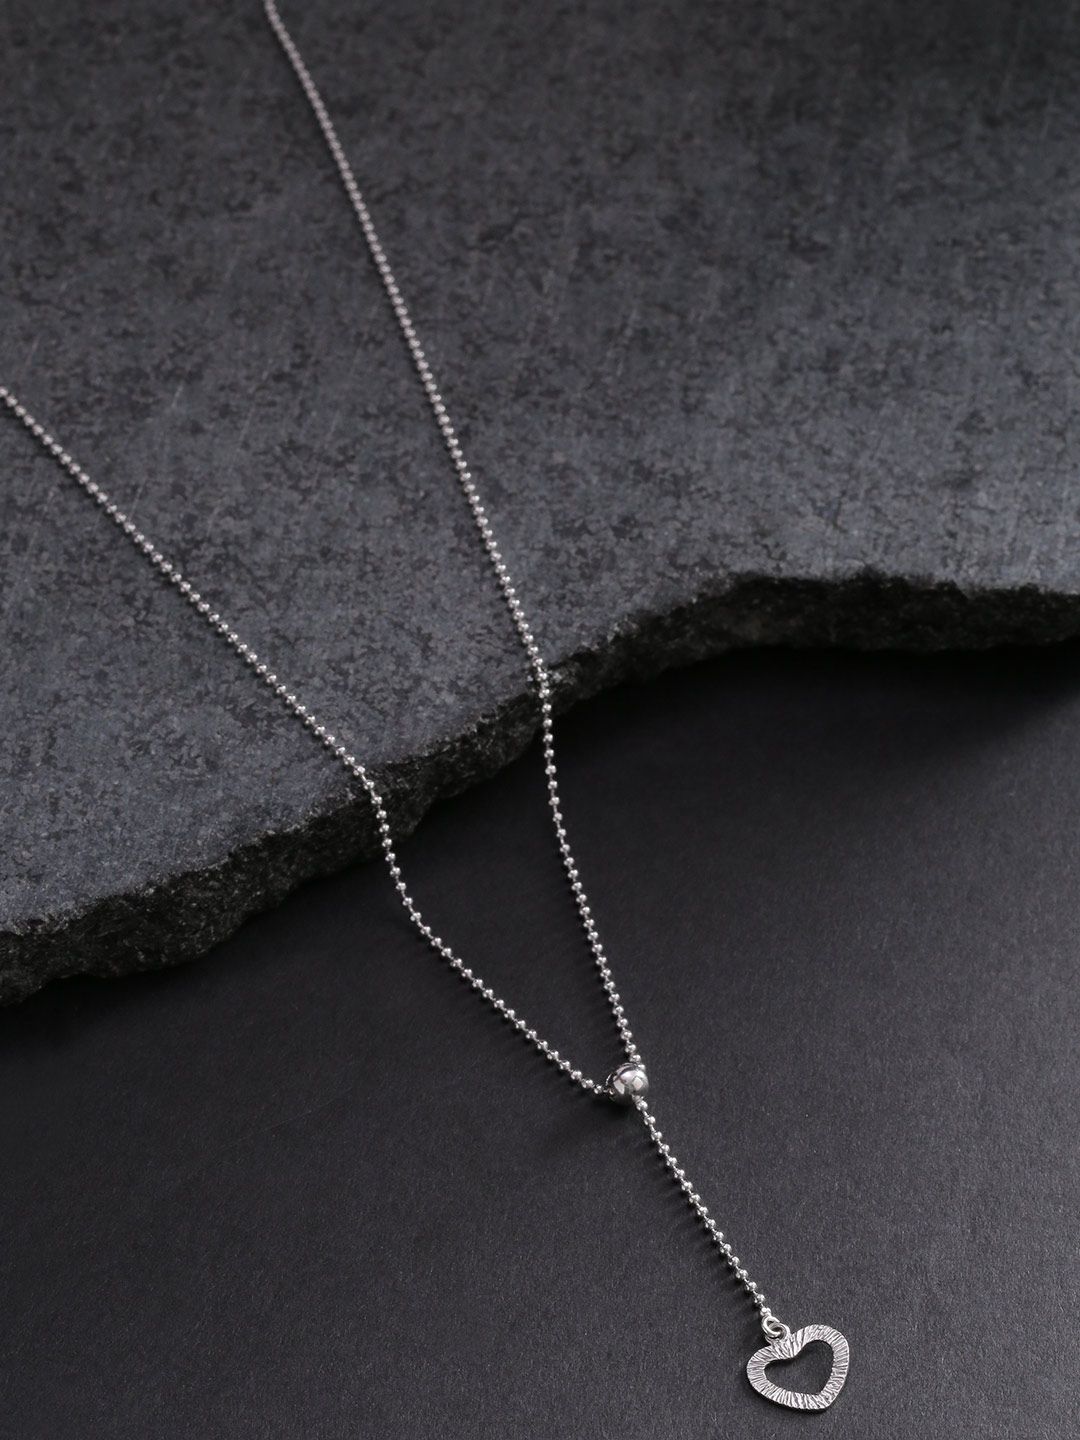 Carlton London Silver-Toned Rhodium-Plated Lariat Necklace Price in India